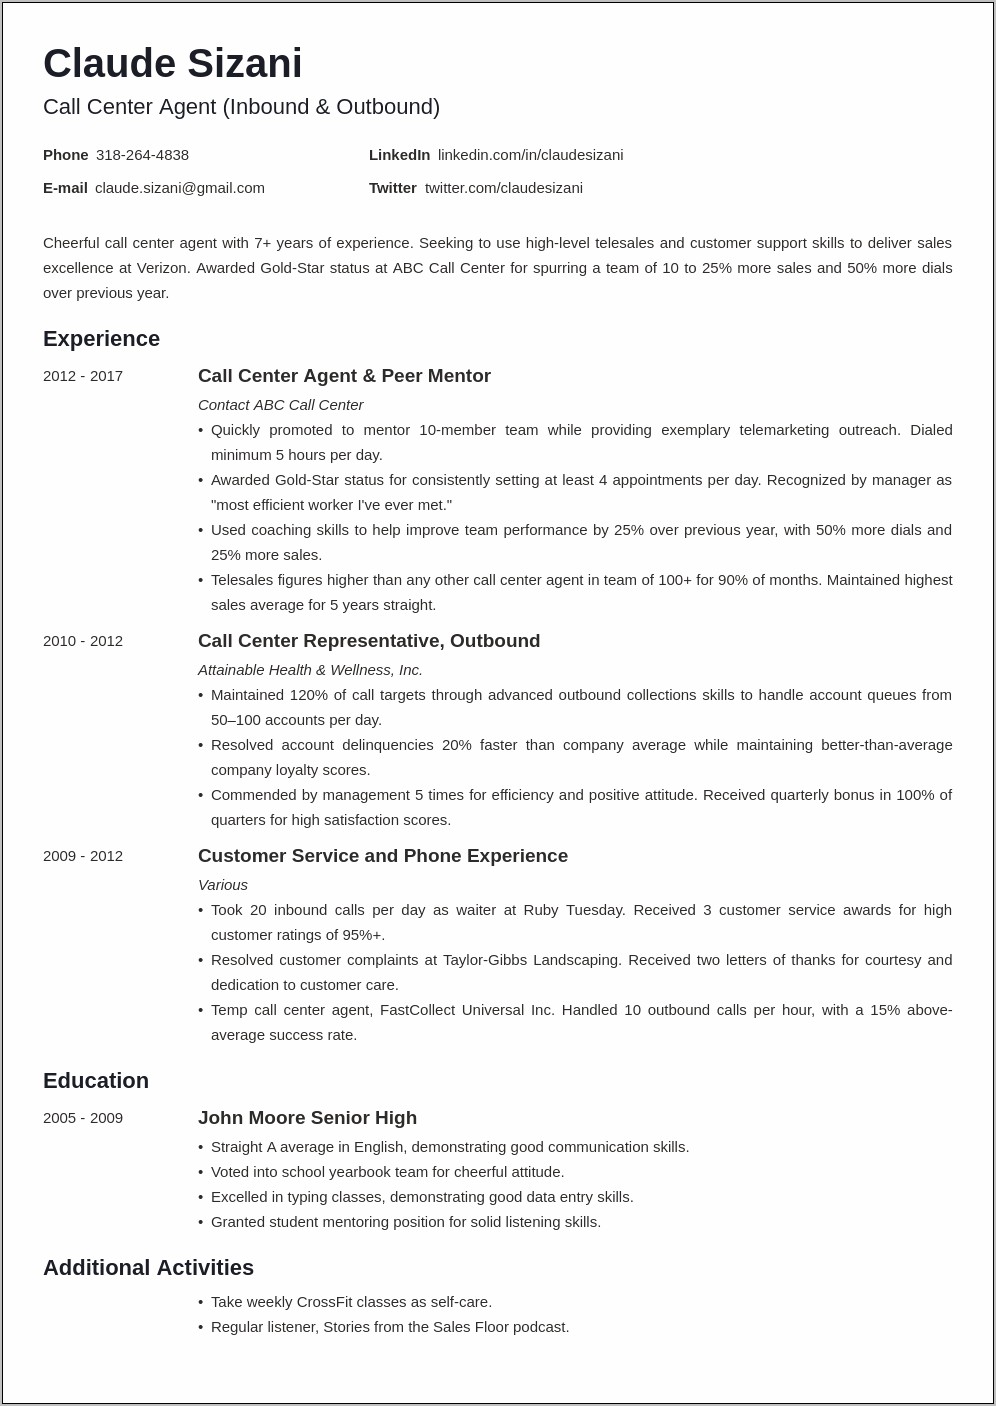 Call Center Executive Resume Free Download